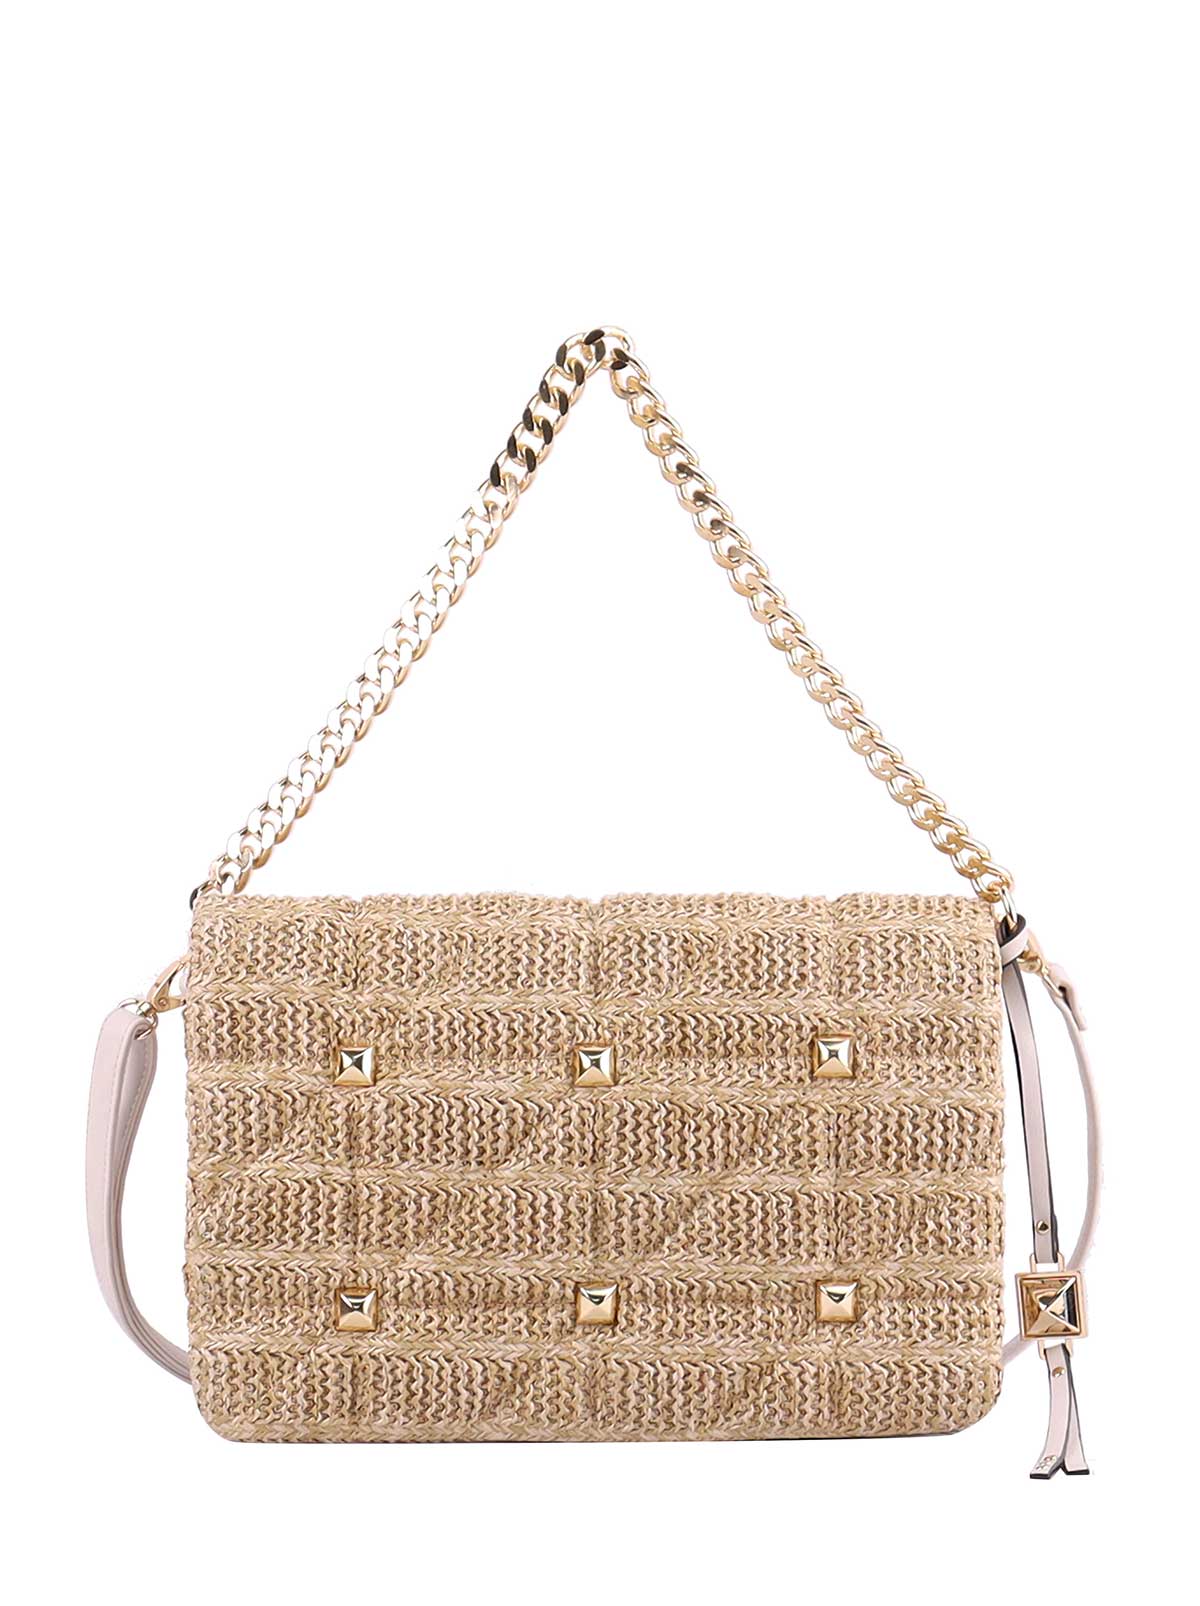 Image of Lexi Crossbody in Straw Natural